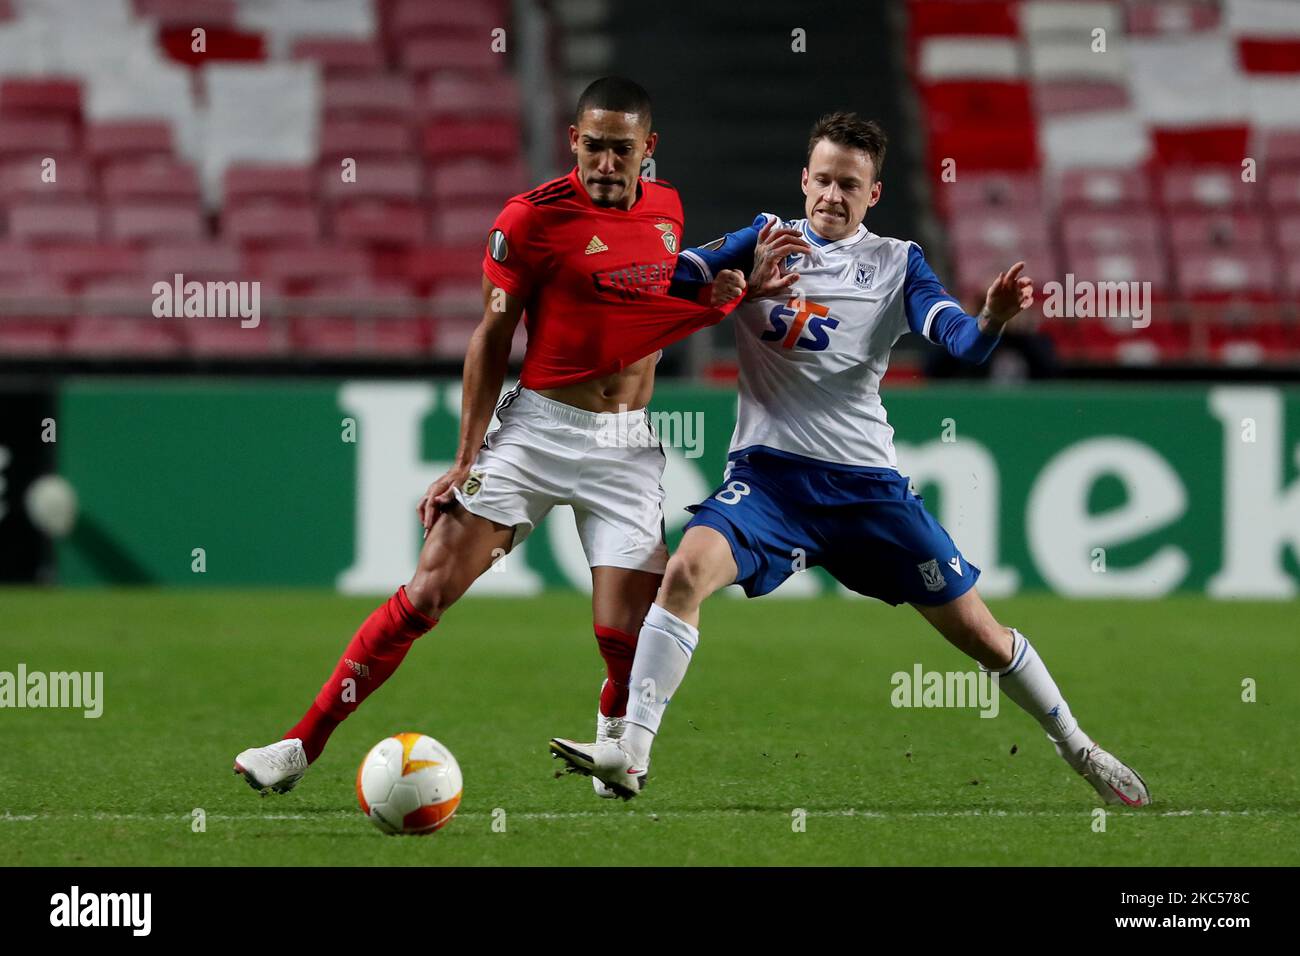 Gilberto of SL Benfica (L) vies with Jan Sykora of Lech Poznan during the UEFA Europa League Group D football match between SL Benfica and Lech Poznan at the Luz stadium in Lisbon, Portugal on December 3, 2020. (Photo by Pedro FiÃºza/NurPhoto) Stock Photo